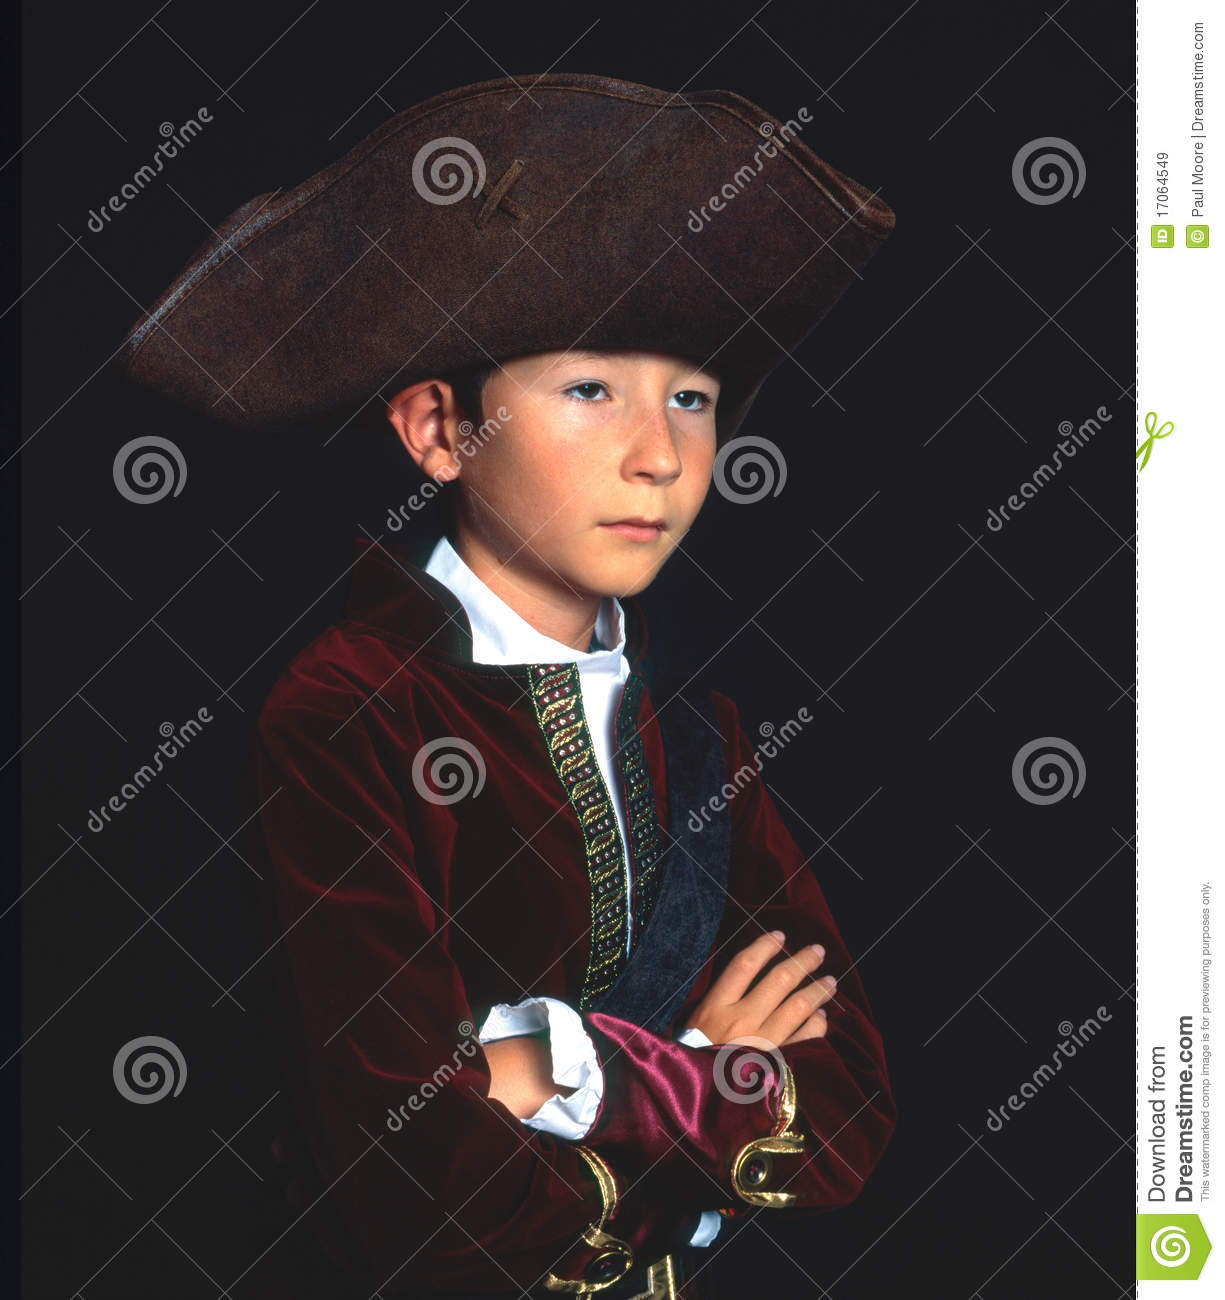 Nice wallpapers Cabin Boy 1225x1300px